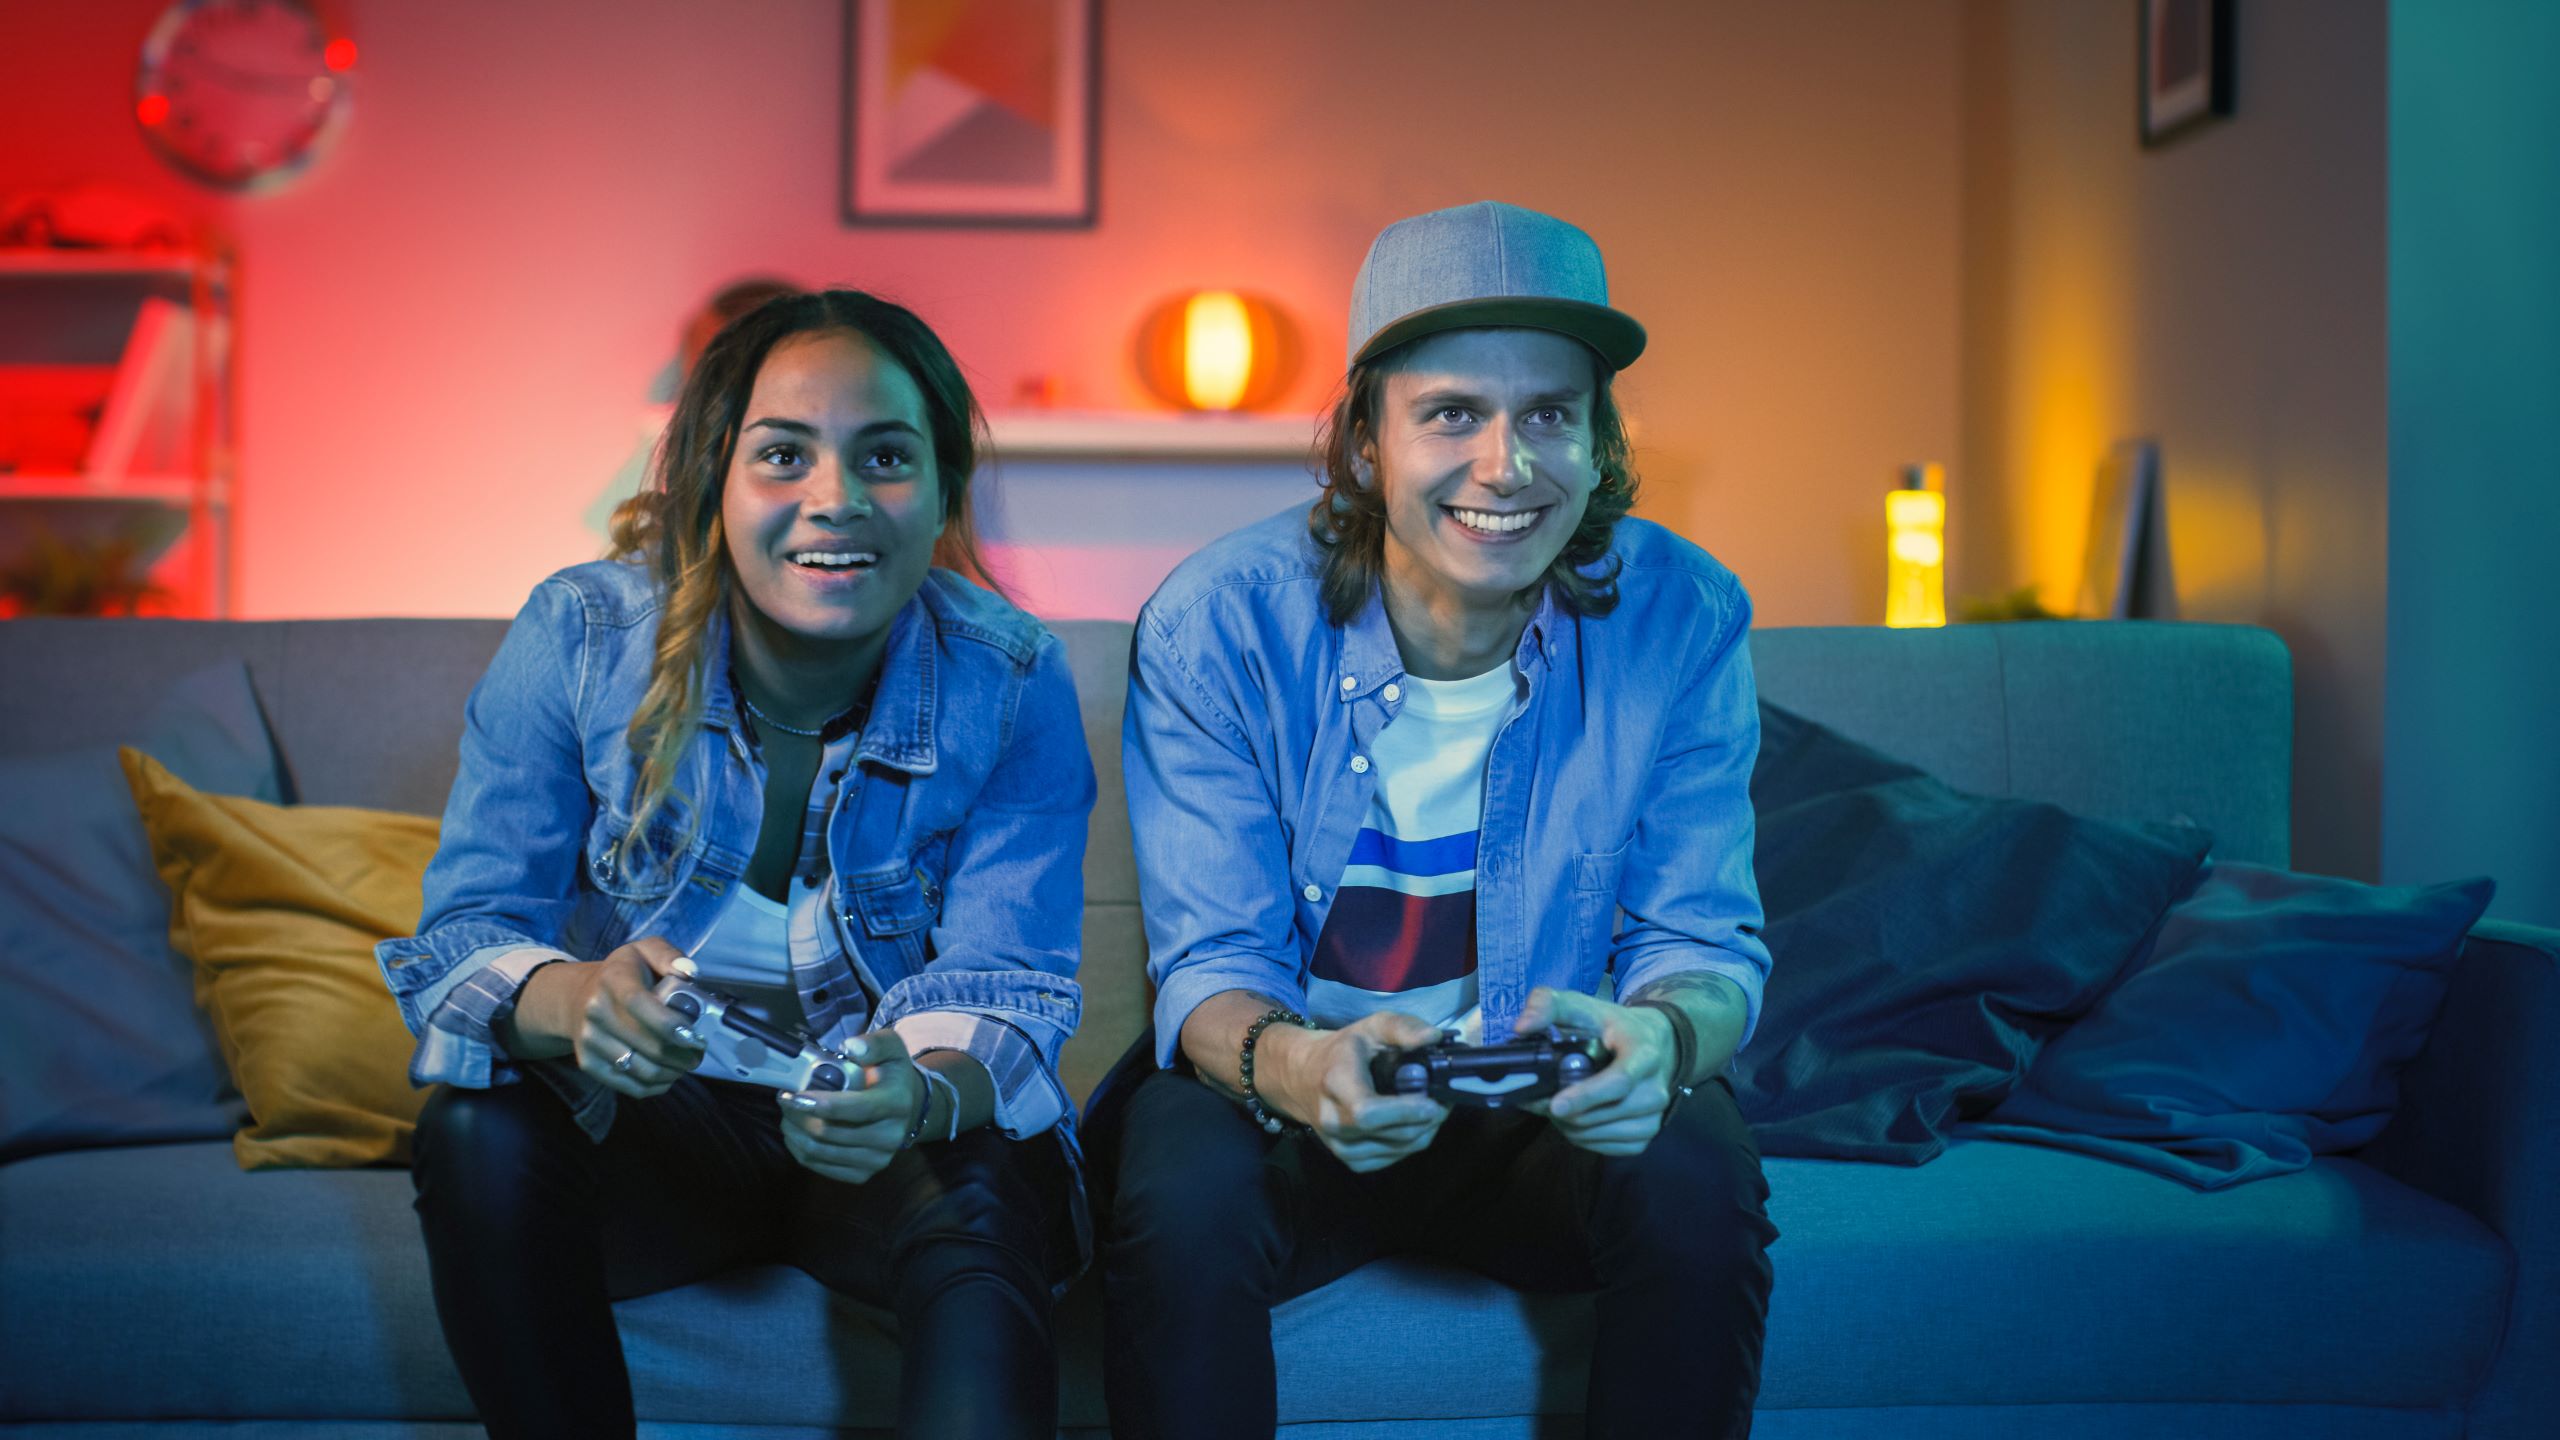 Two friends on a couch playing video games together